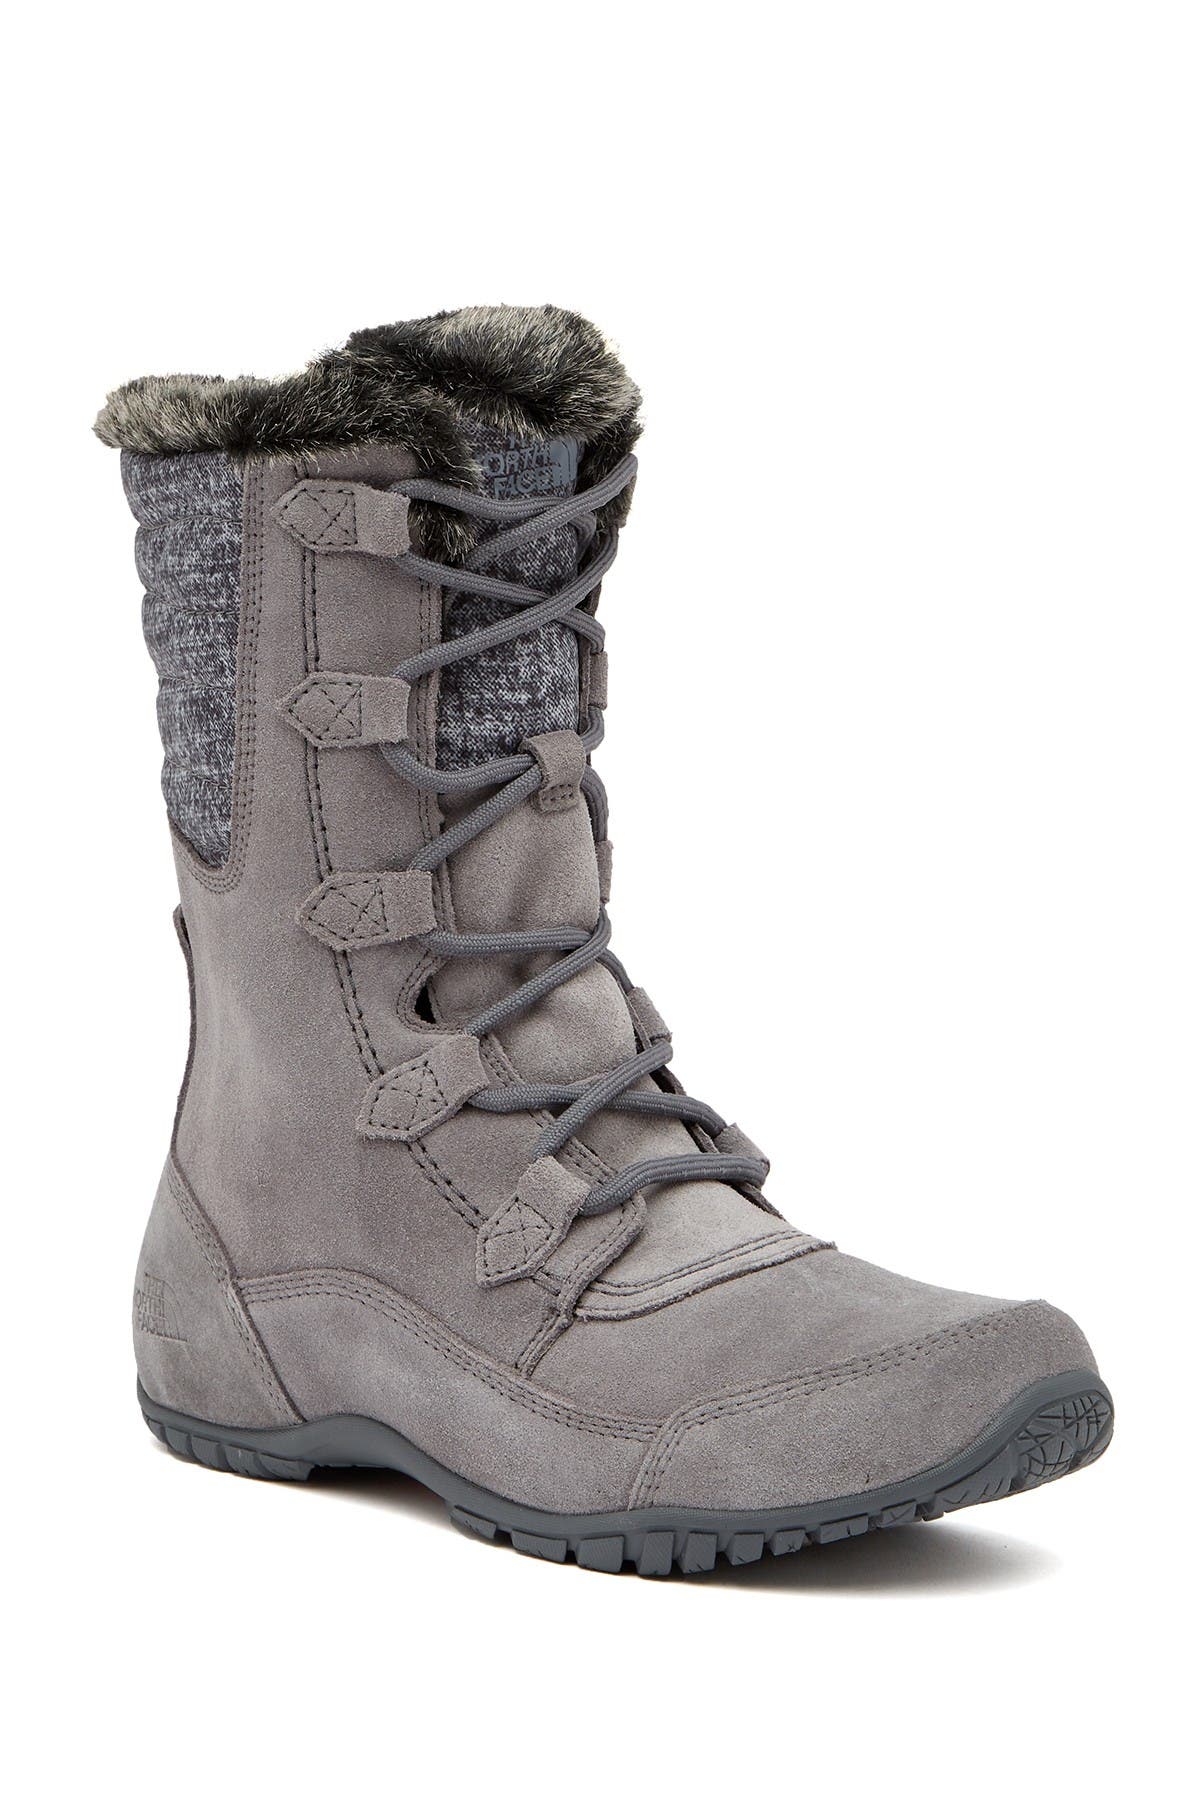 north face boots nordstrom